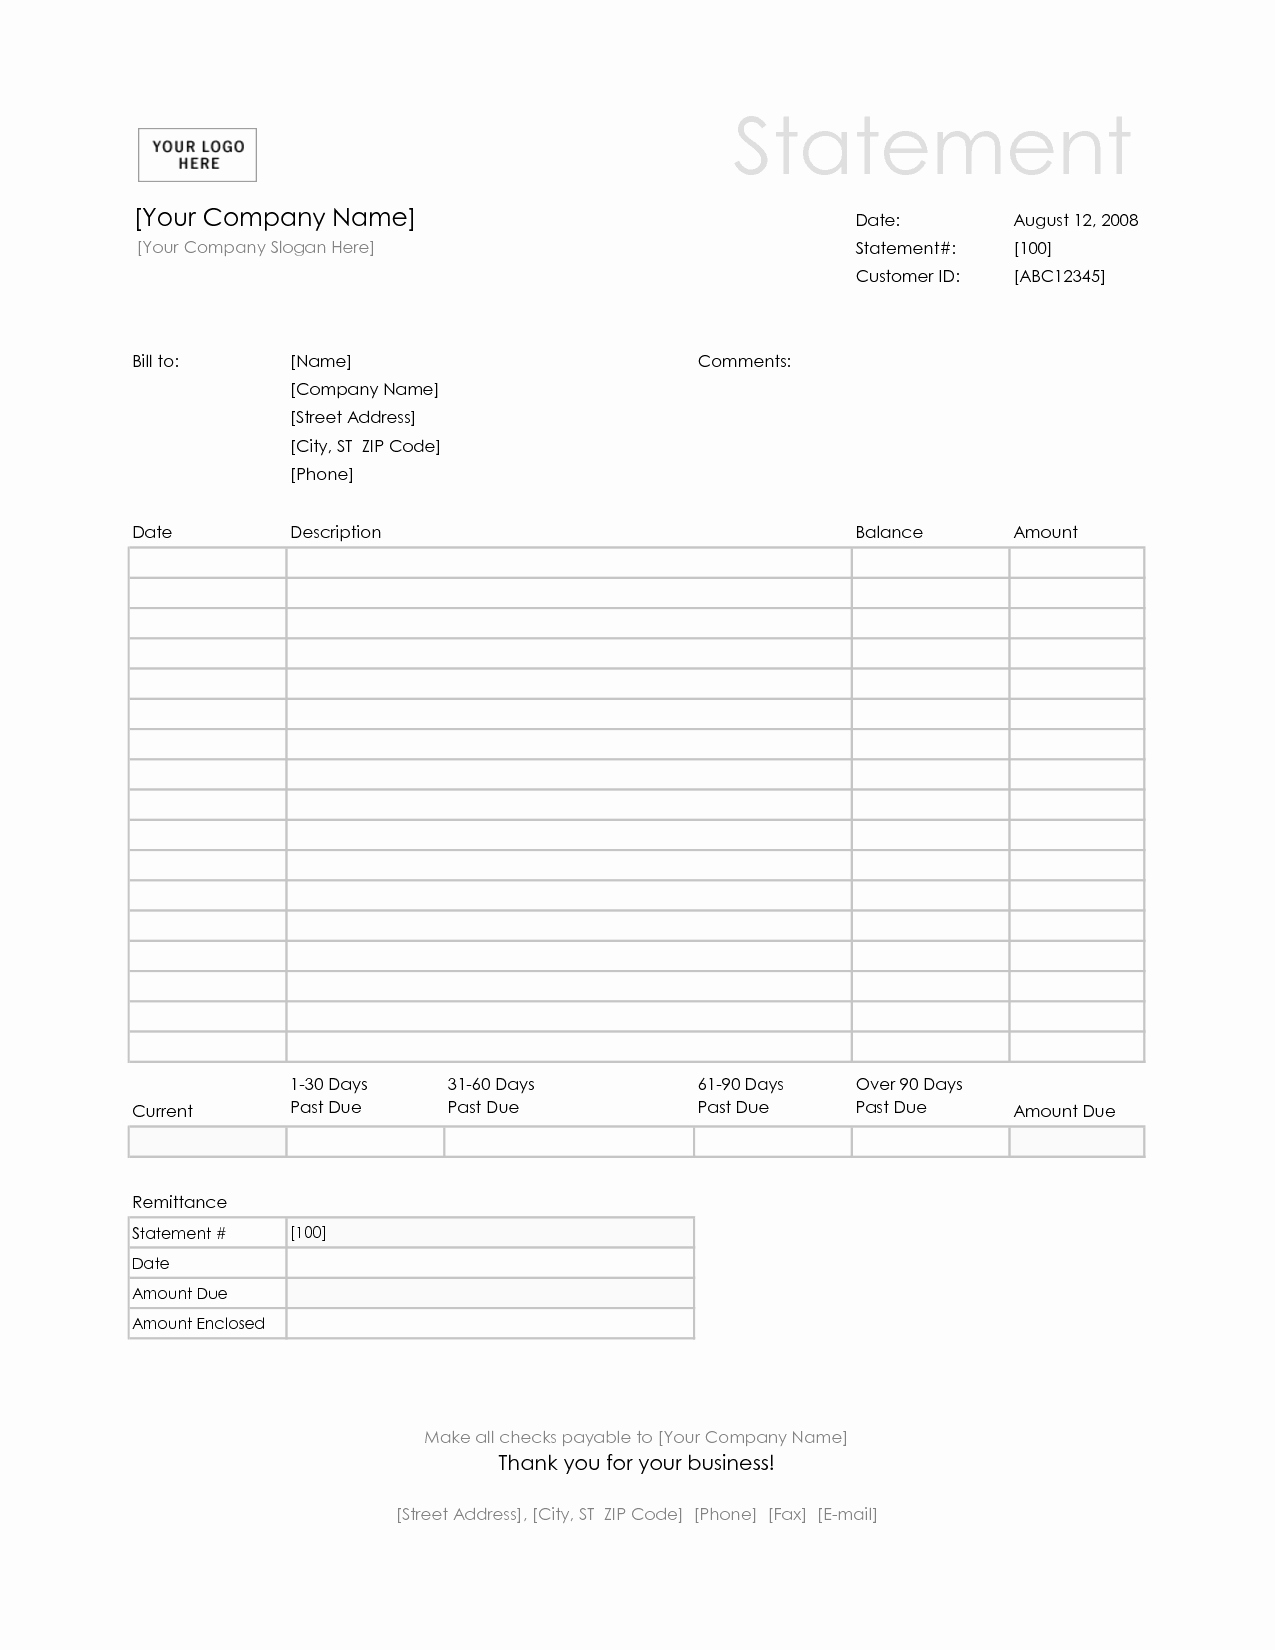 Statement Of Invoices Template Free Awesome Invoice Statement Invoice Design Inspiration